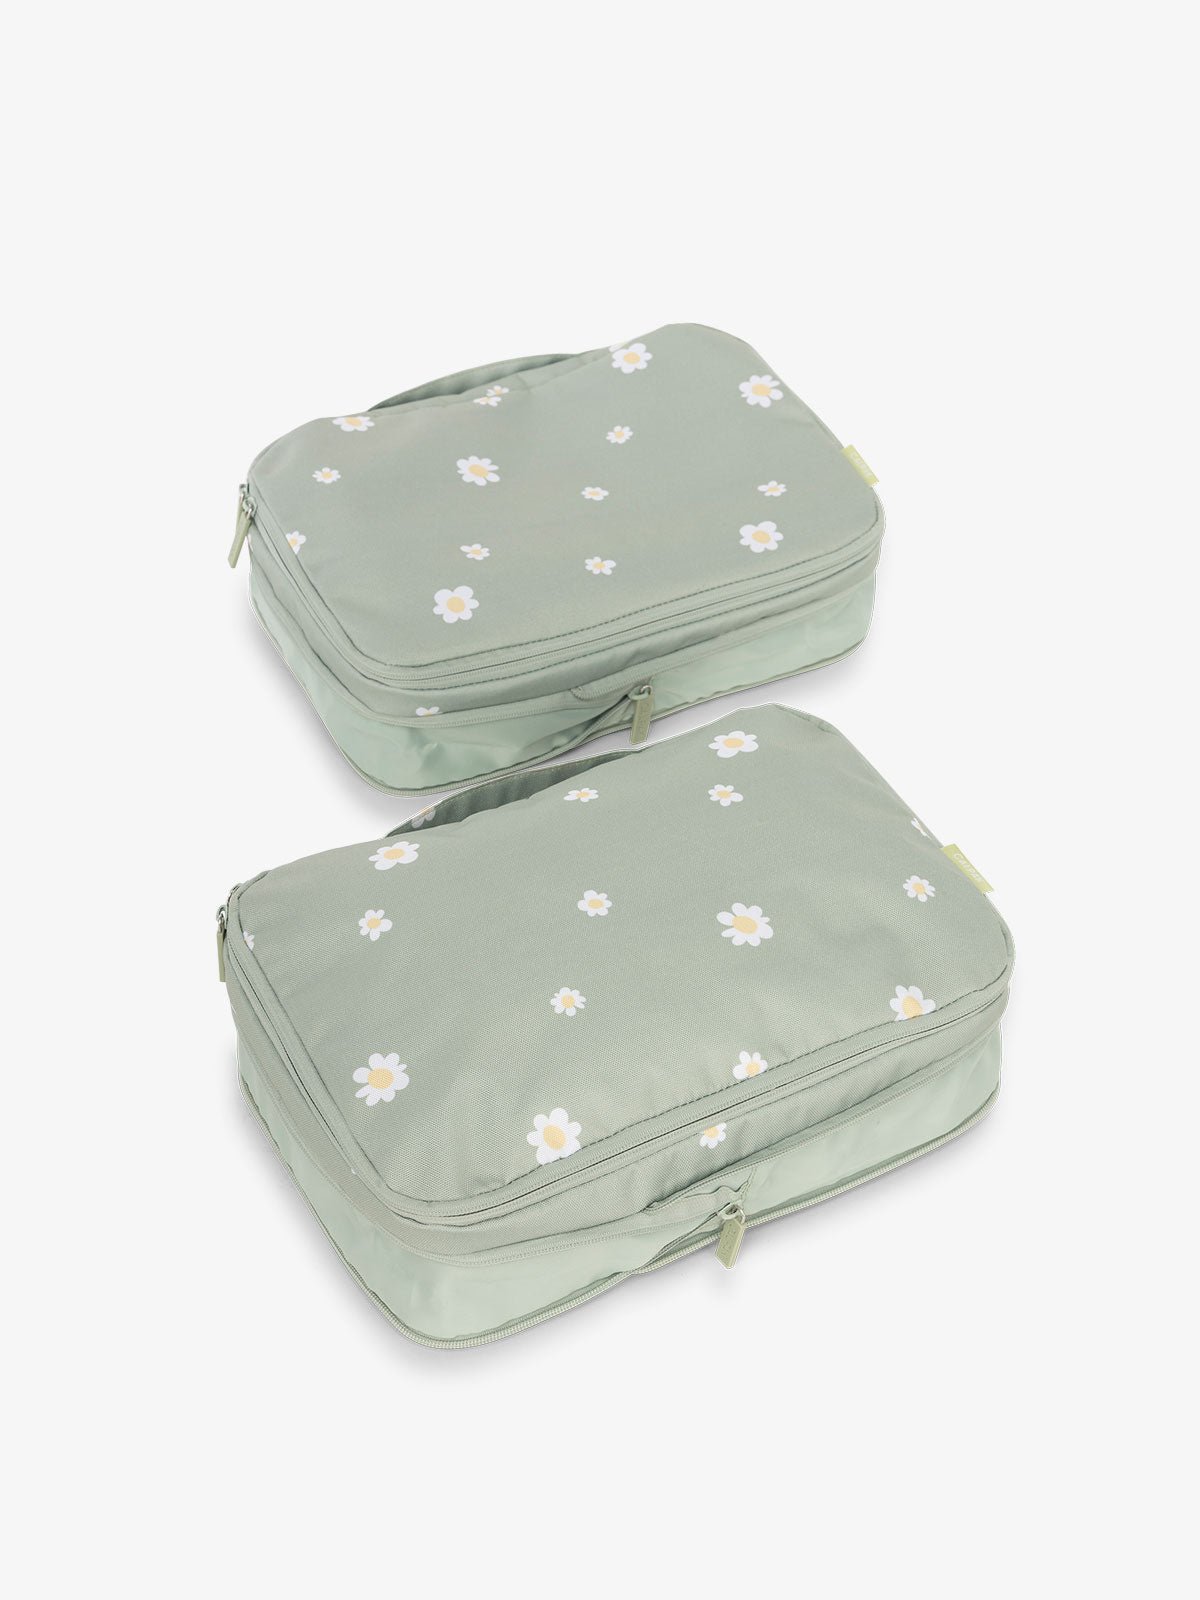 CALPAK compression packing cubes with handles in green daisy floral print